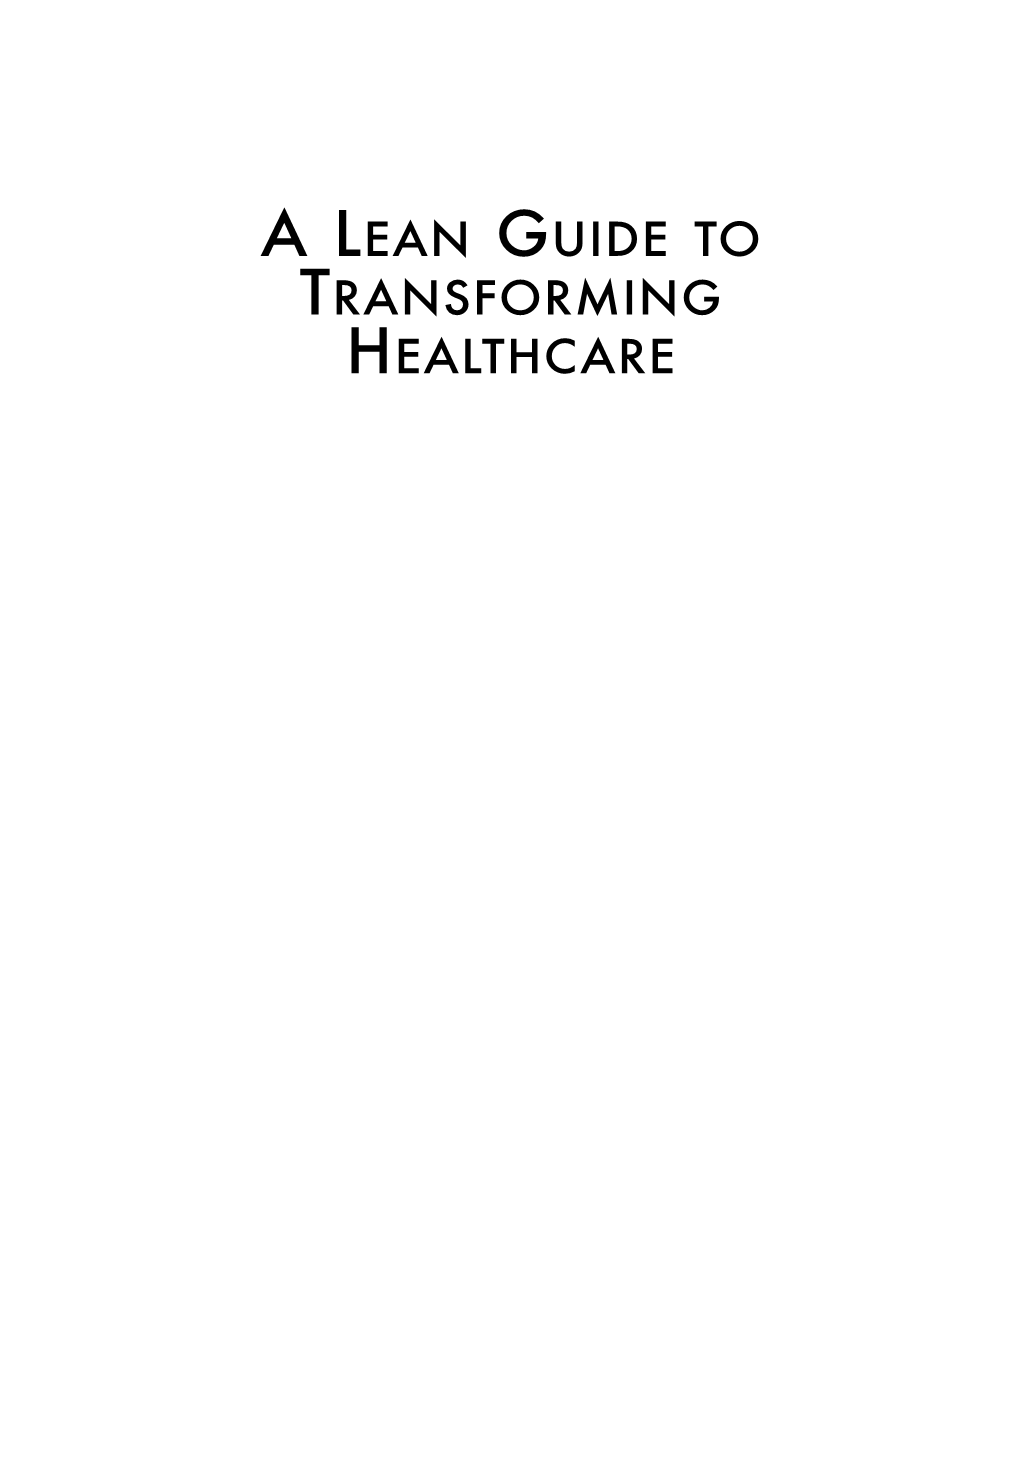 LEAN GUIDE to TRANSFORMING HEALTHCARE H1295 Zidel 00Front.Qxd 8/15/06 11:52 AM Page 2